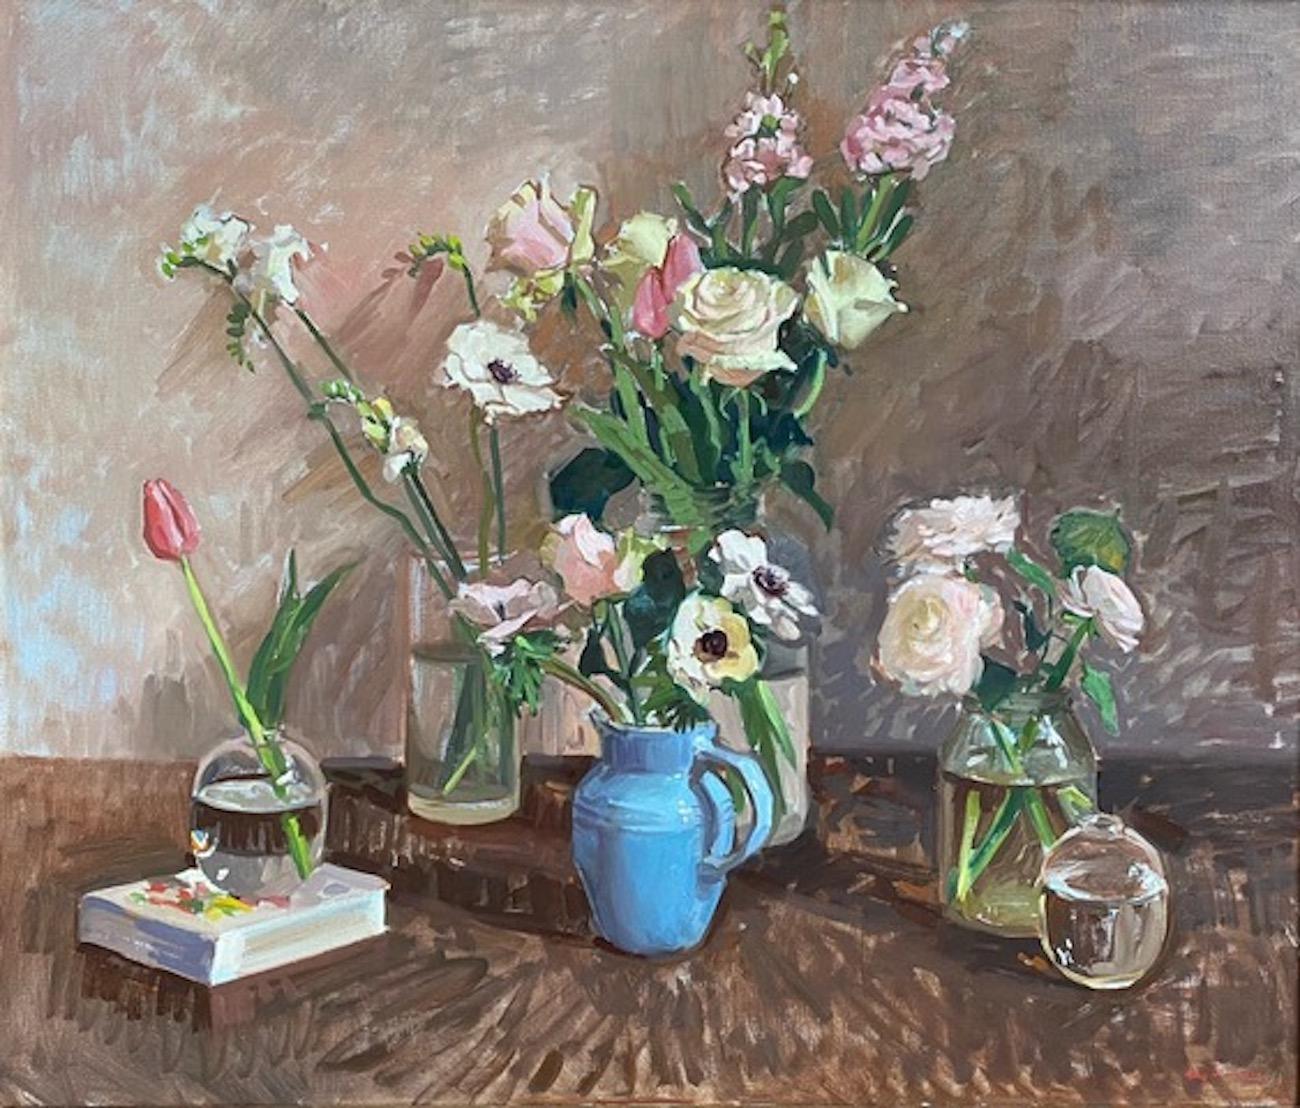 Amy Florence Still-Life Painting - "Blue Jug" contemporary oil painting still life with pink flowers, book, pottery